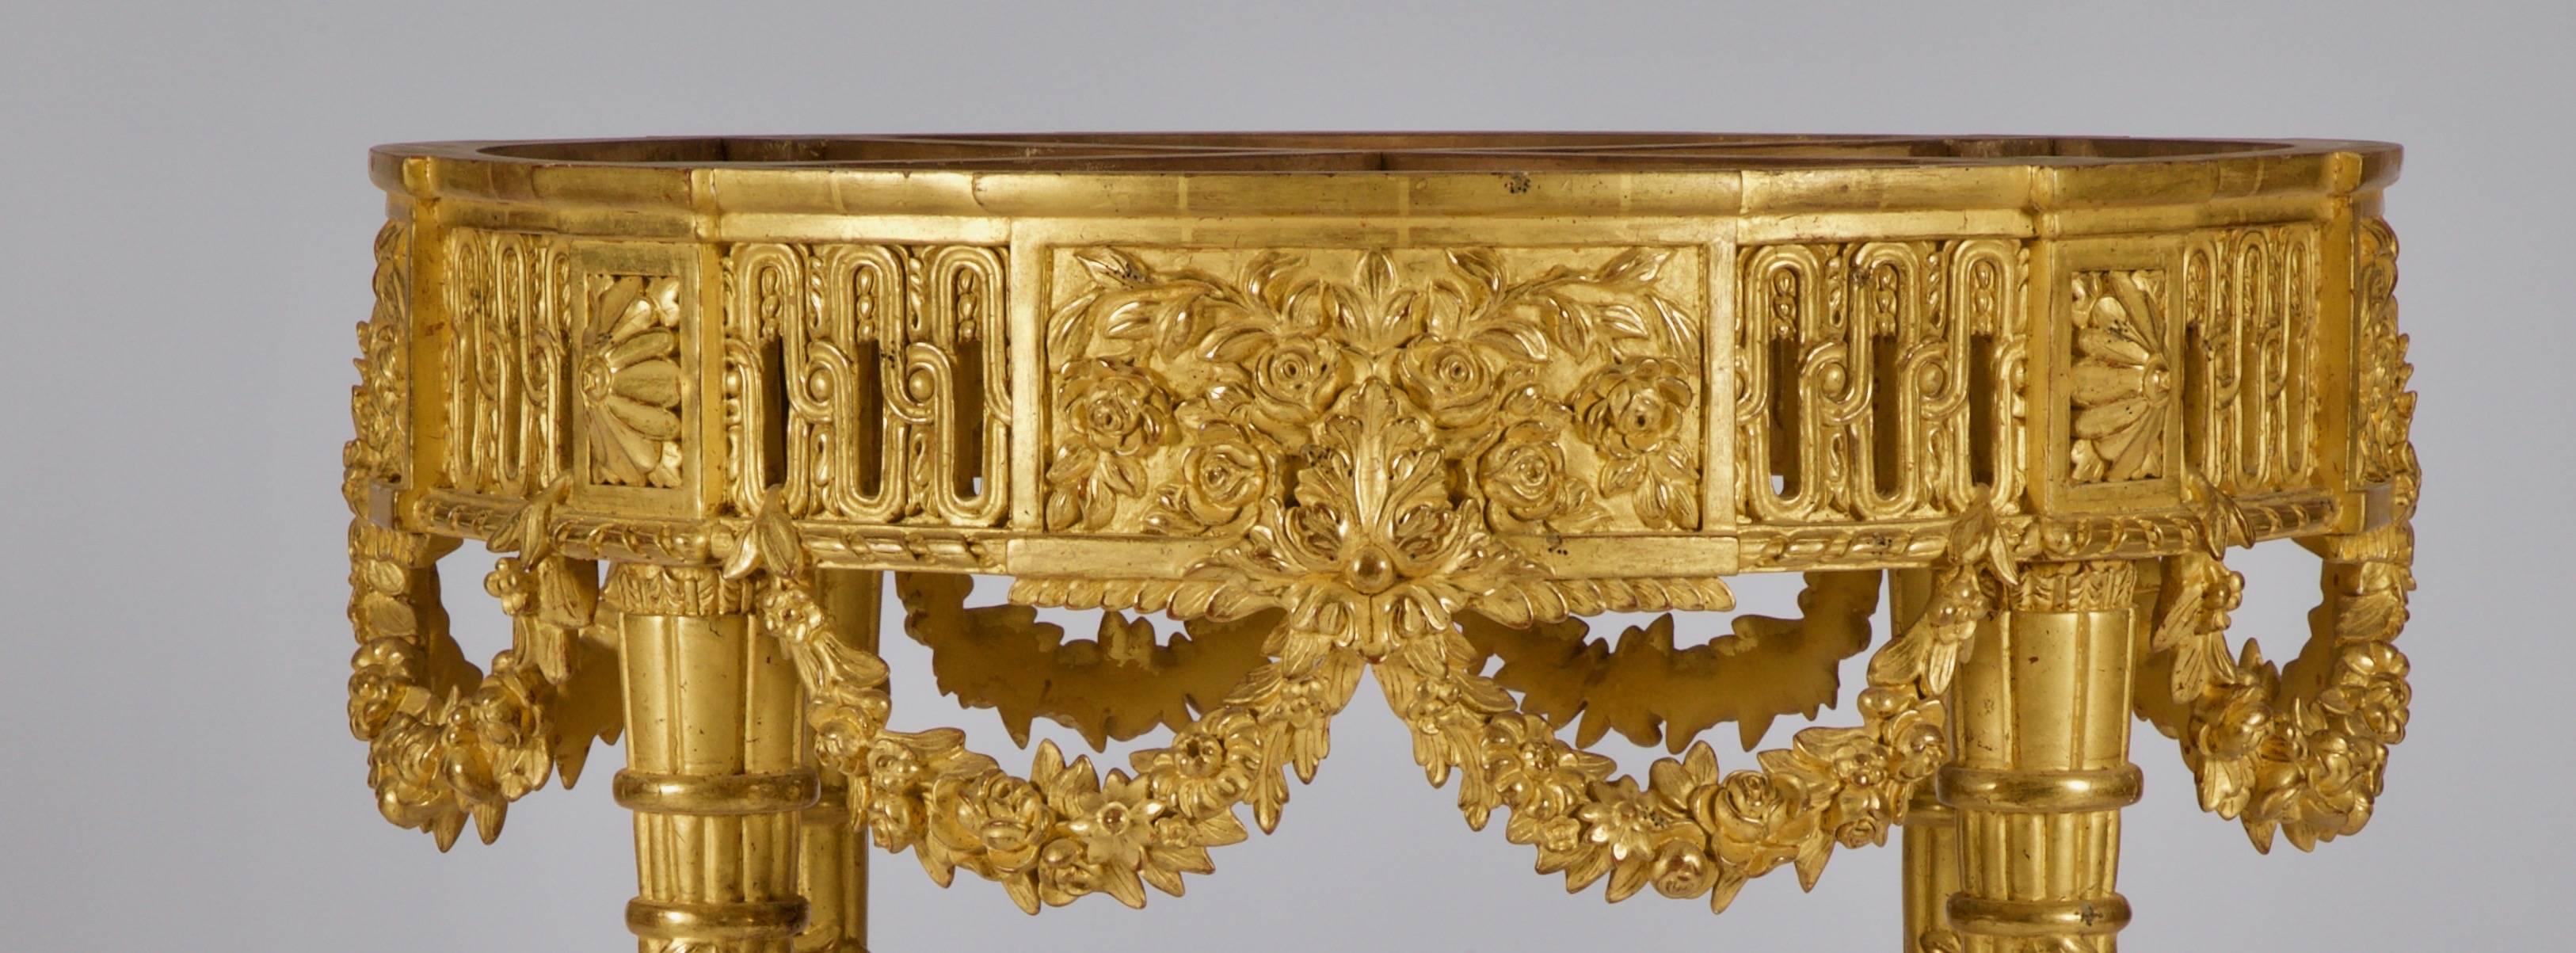 Hand-Carved Pair of Louis XVI Style Giltwood Console Tables  by La Maison London